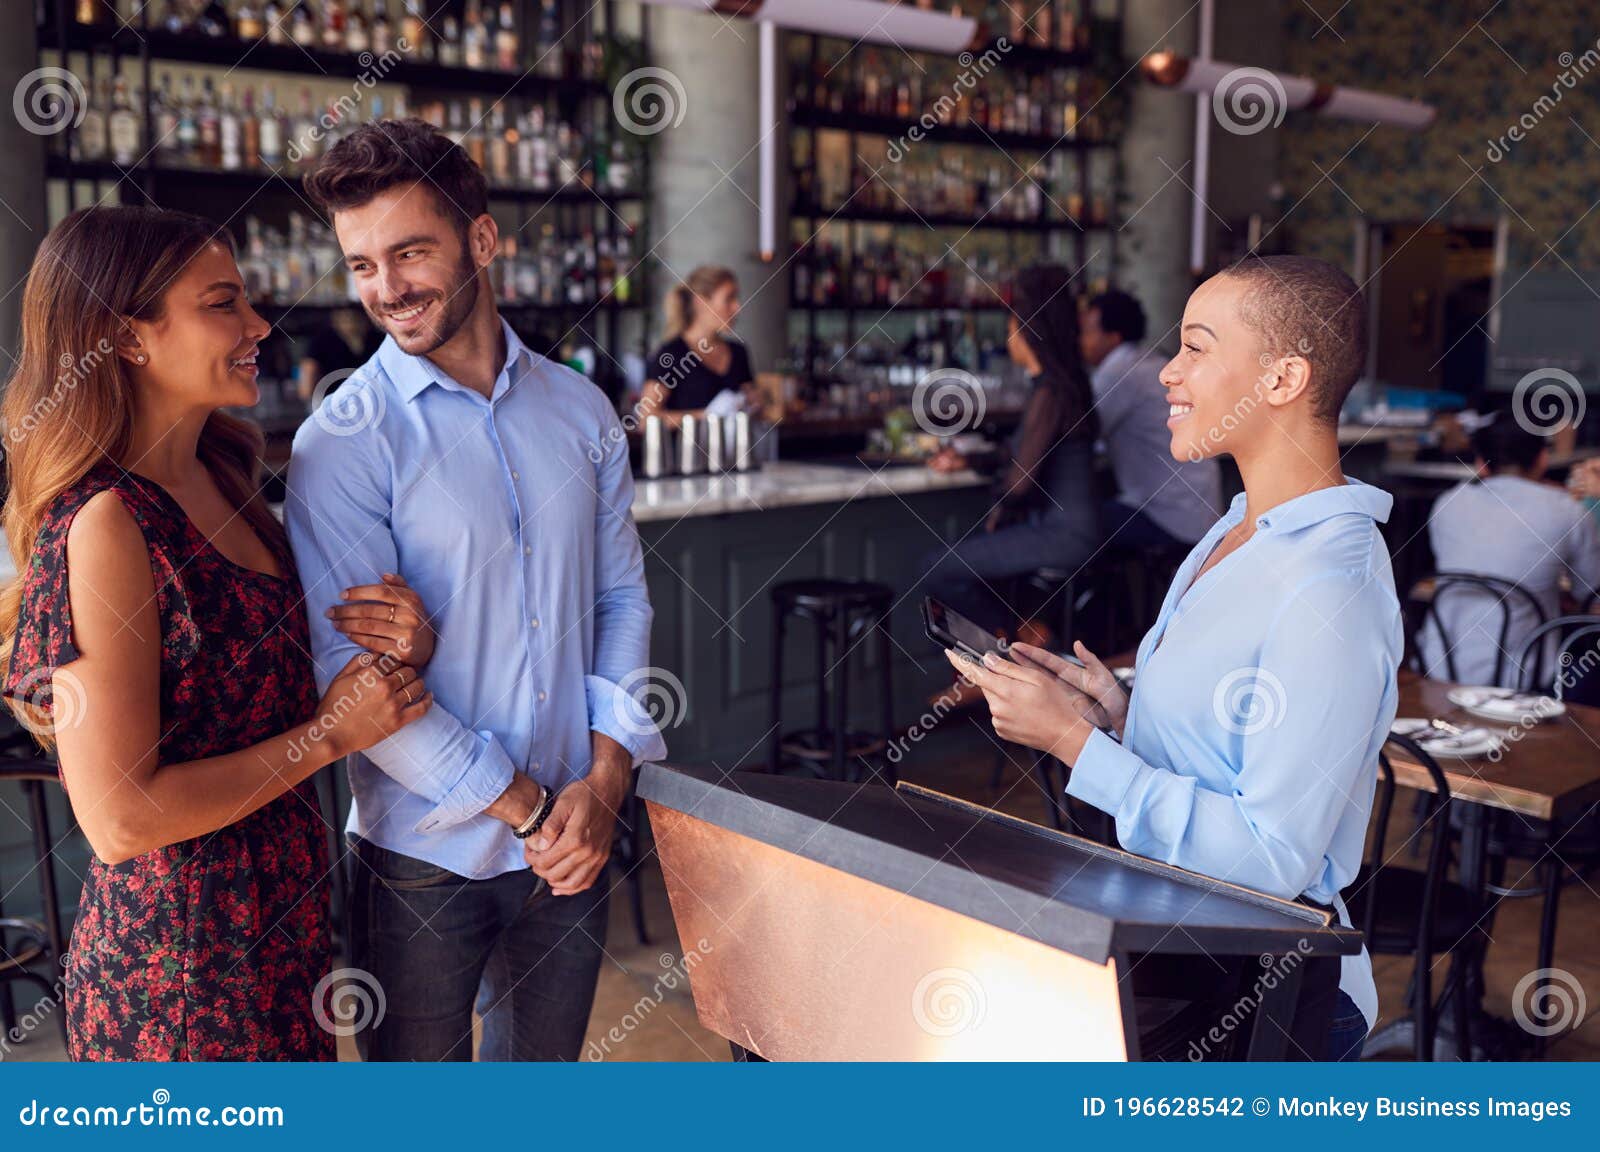 couple being greeted by maitre d using digital tablet as they arrive at restaurant